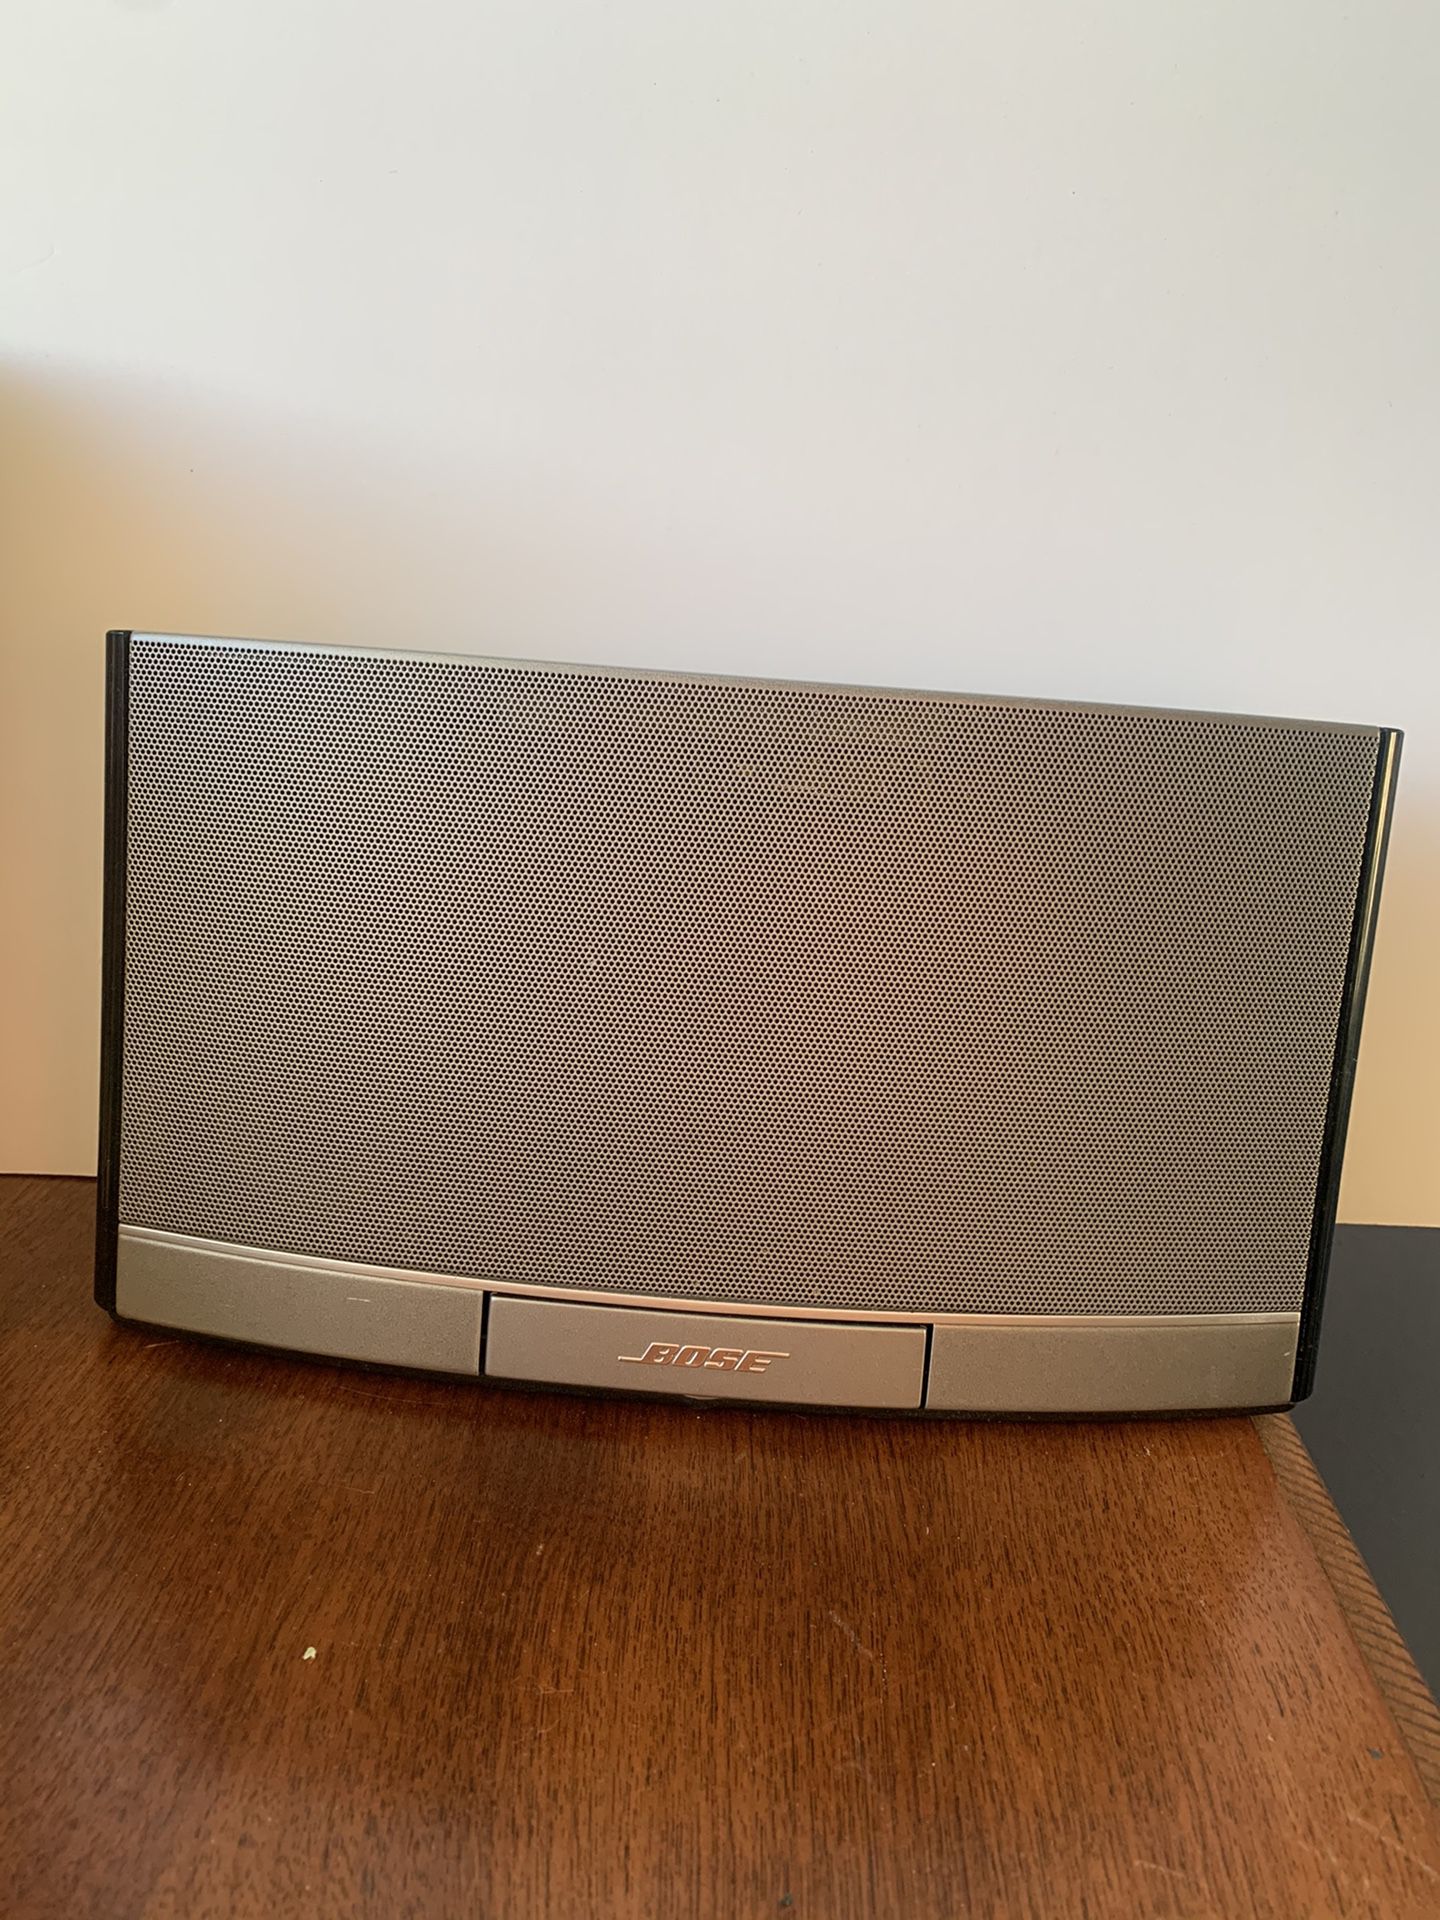 Bose SoundDock Portable Digital Music System N123 Dock Remote and Charger included